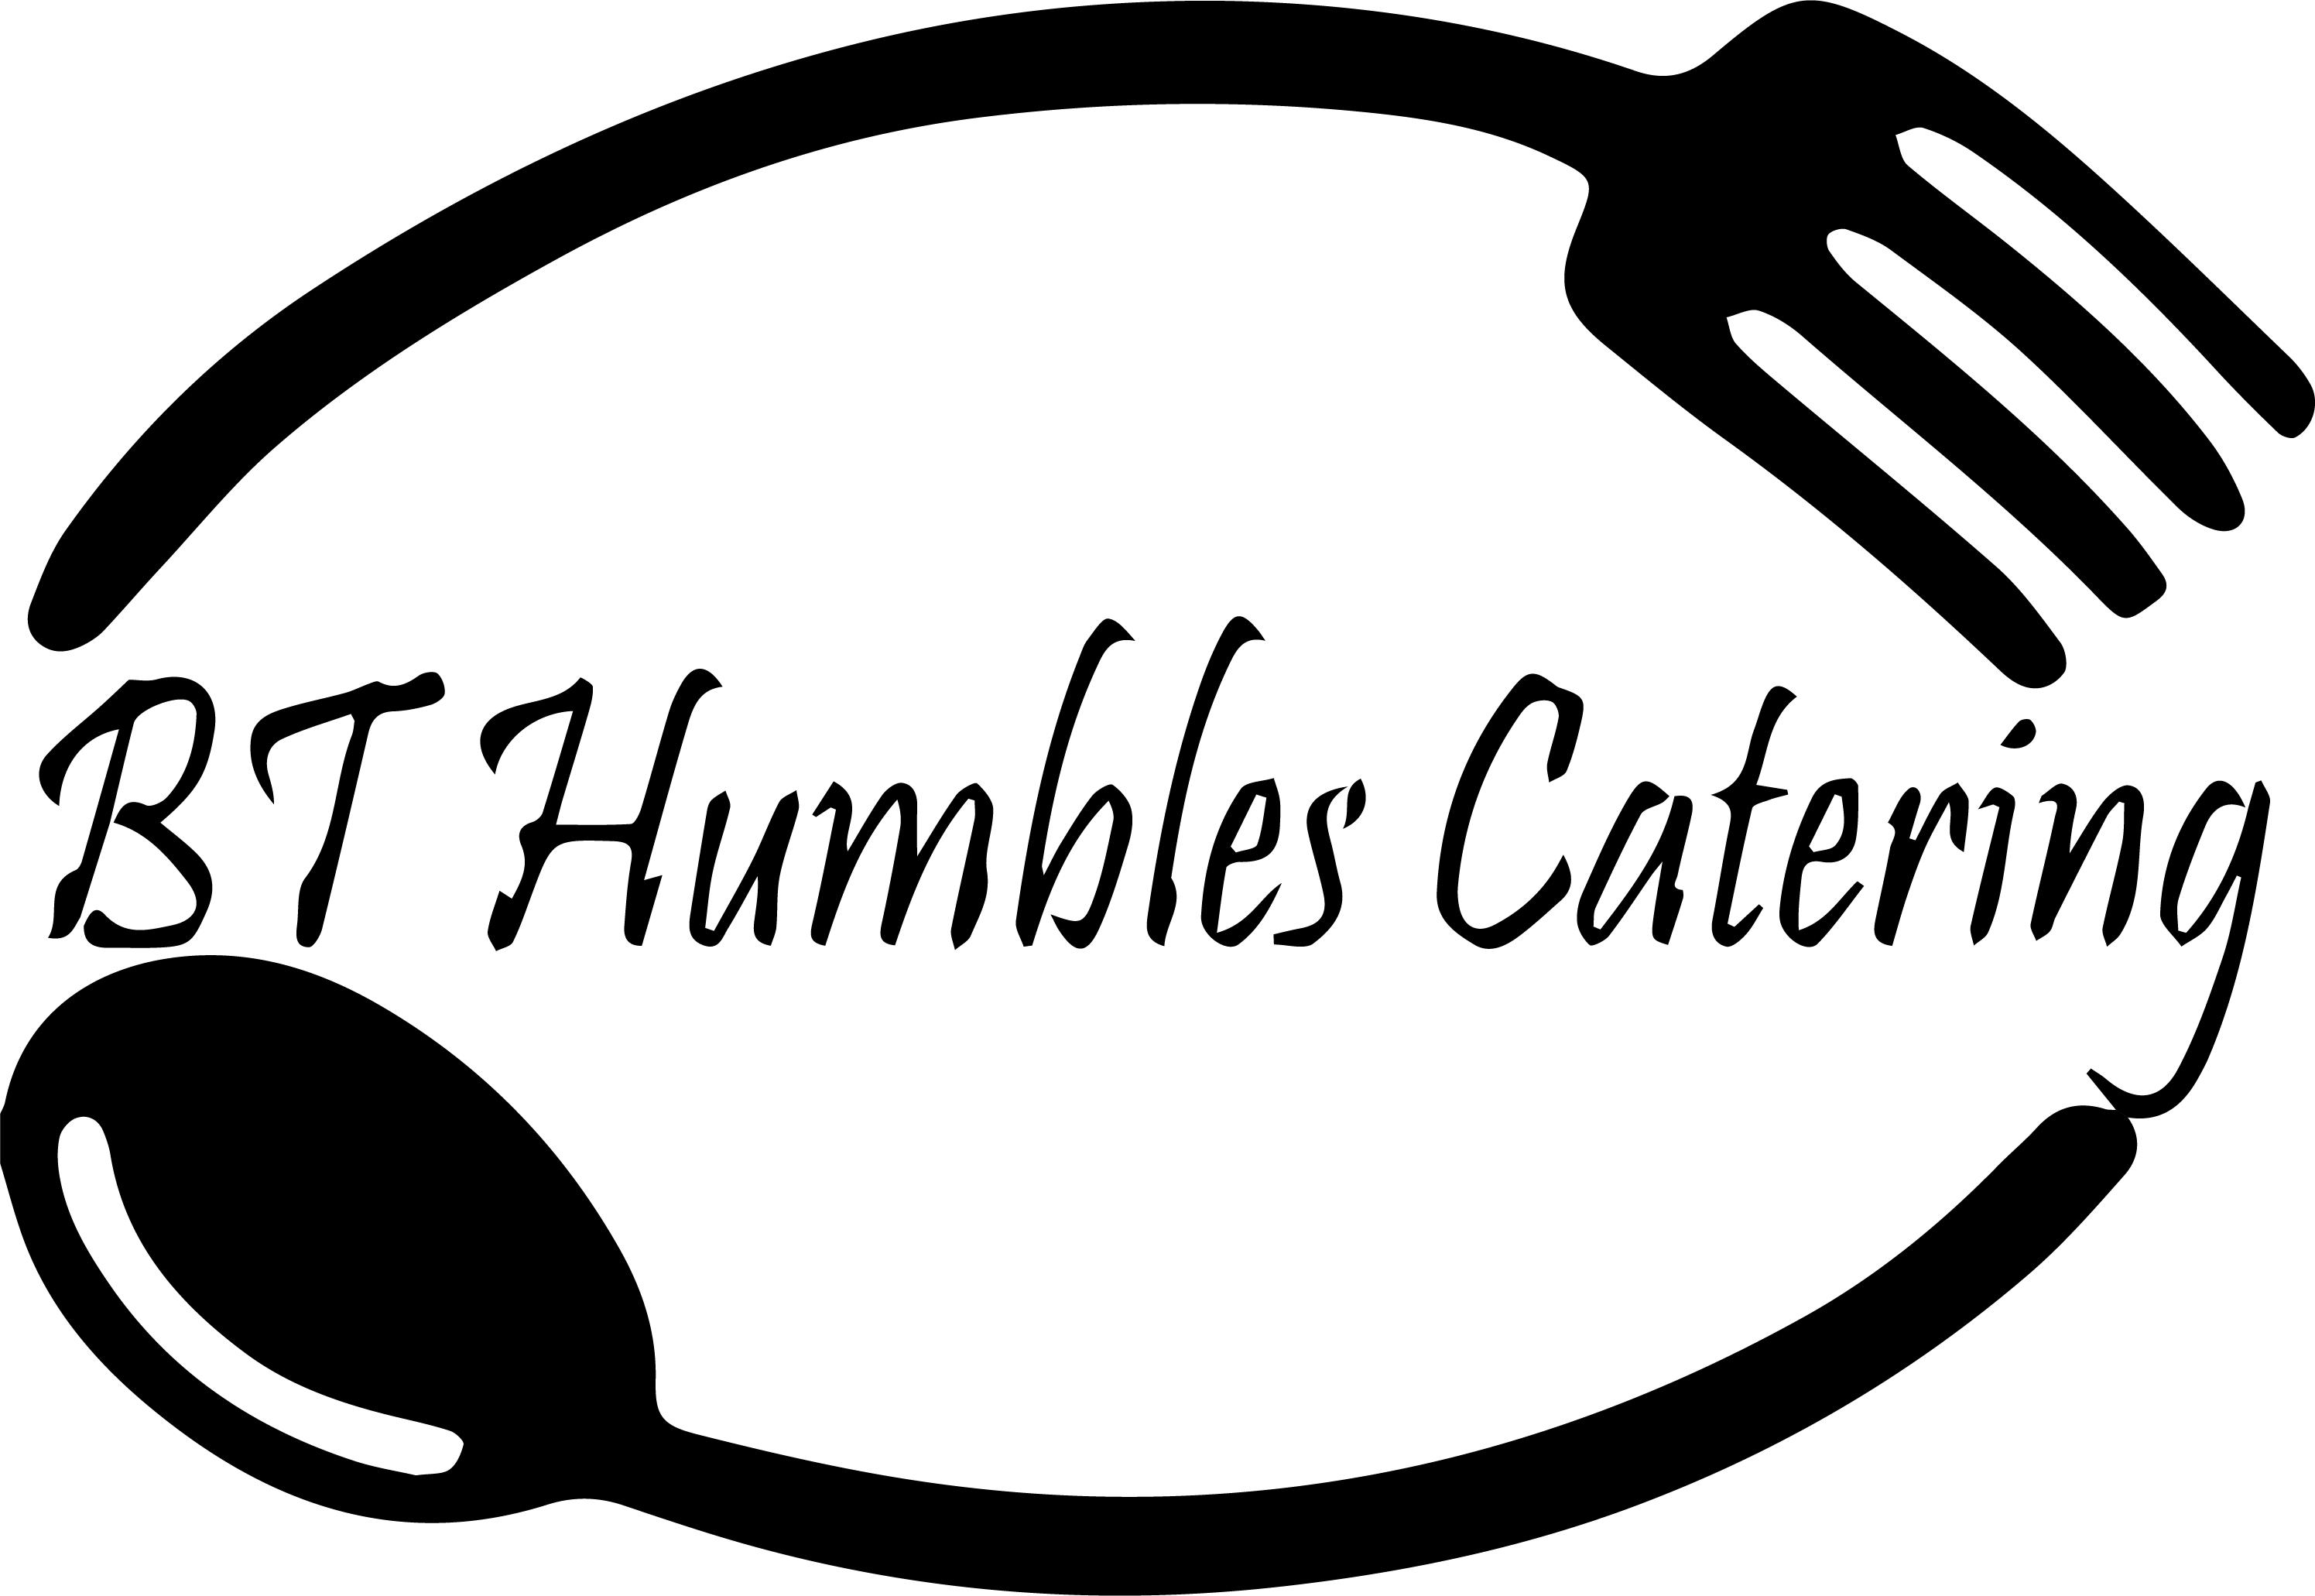 BTHumbles Catering